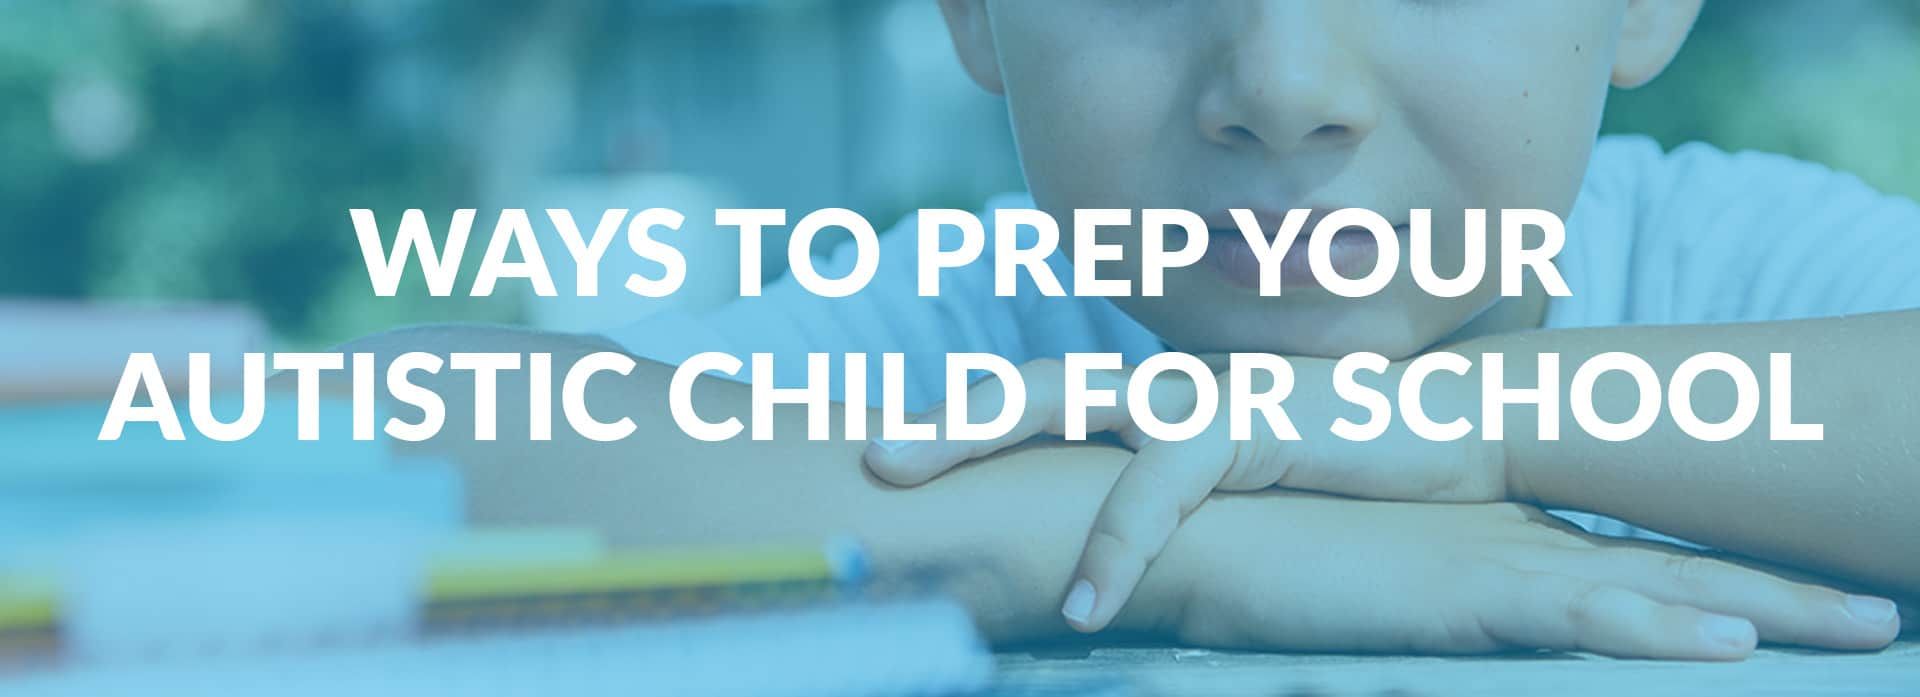 4 Ways To Prep Students With Autism For The New School Year 4 Ways To Prep Students With ASD For The New School Year 4 Ways To Prep Students With ASD For The New School Year 4 Ways To Prep Students With ASD For The New School Year